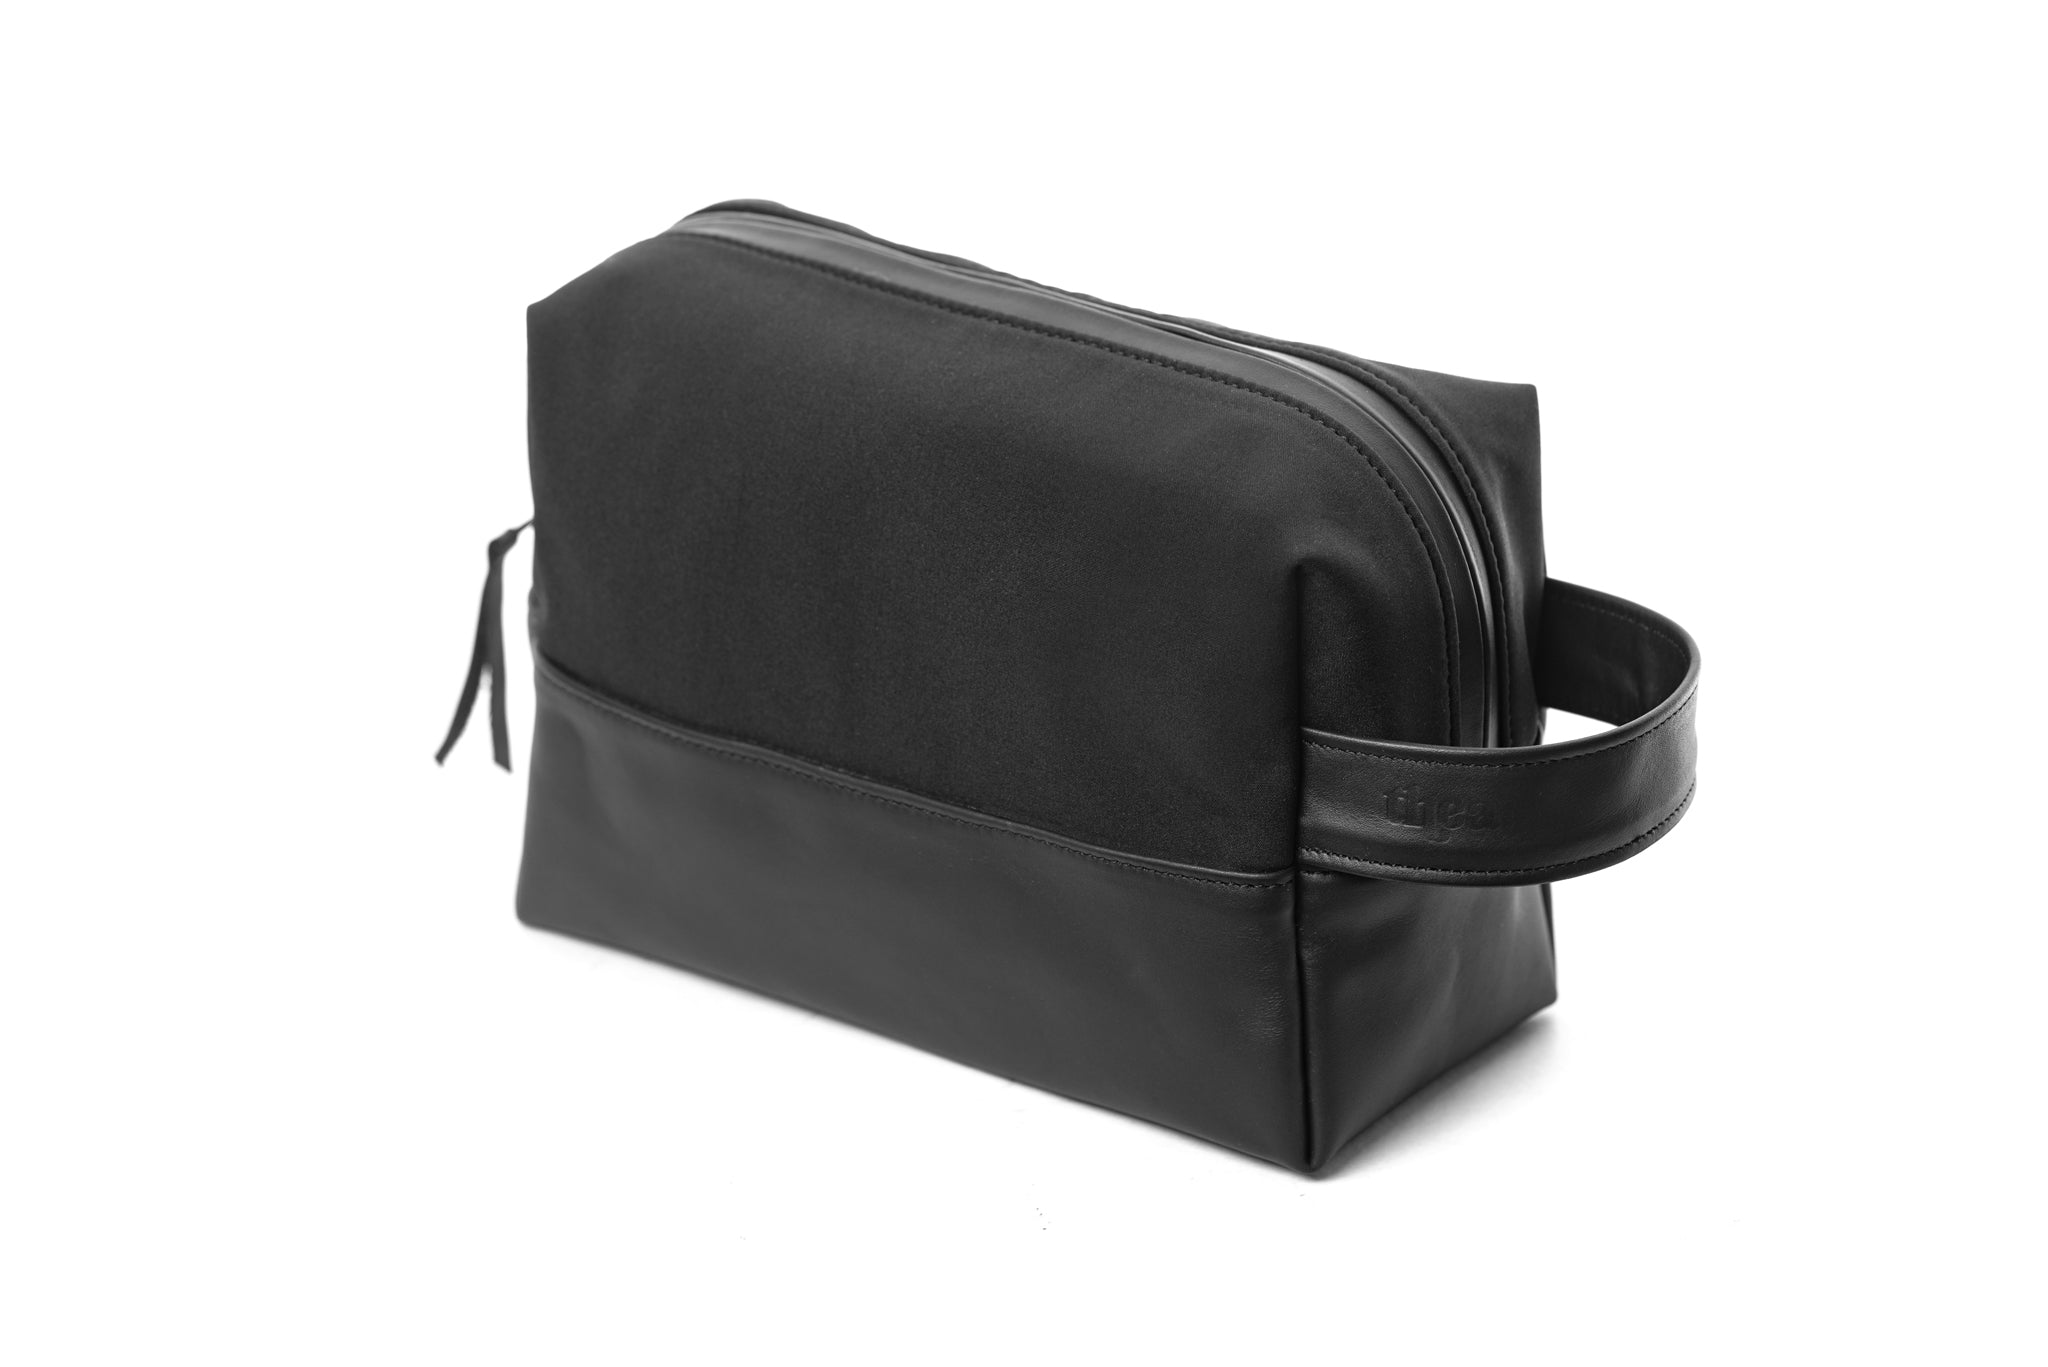 SCENT Beauty Case Large-Black - theabags